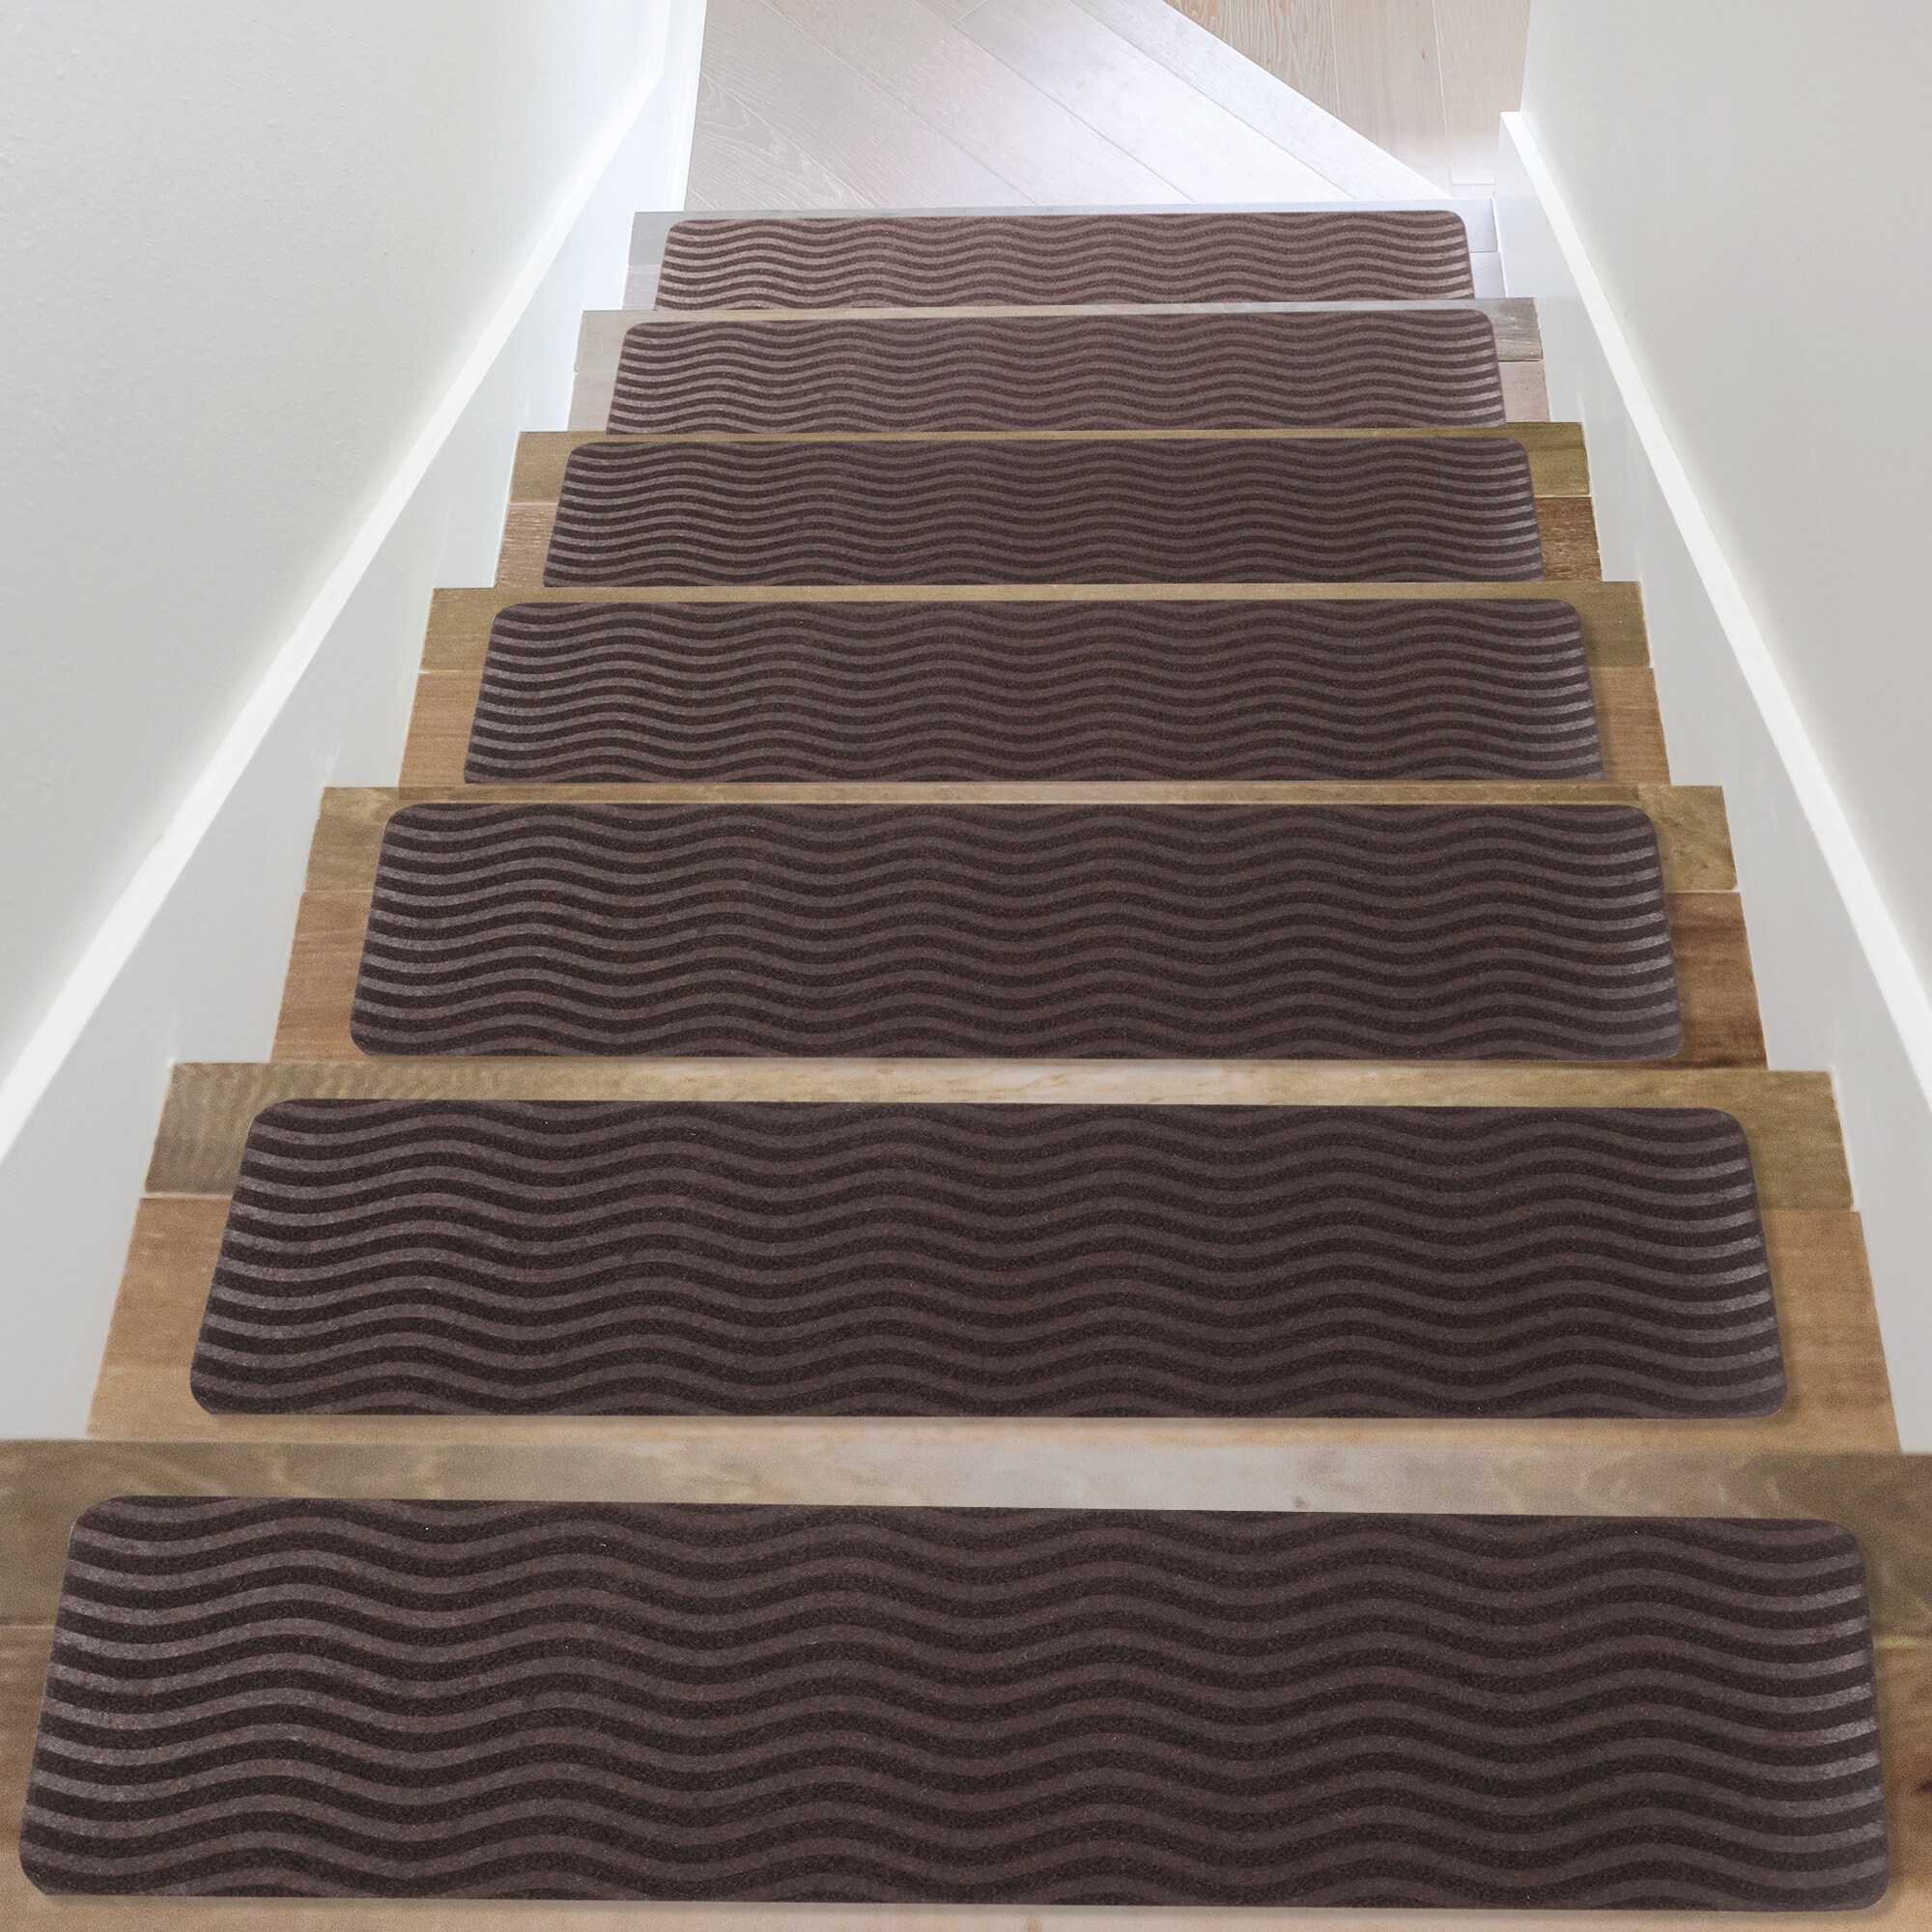 Skid-resistant 9 x26" Stair Treads Runners Step Pads Carpet Mats Rugs Set of 5 